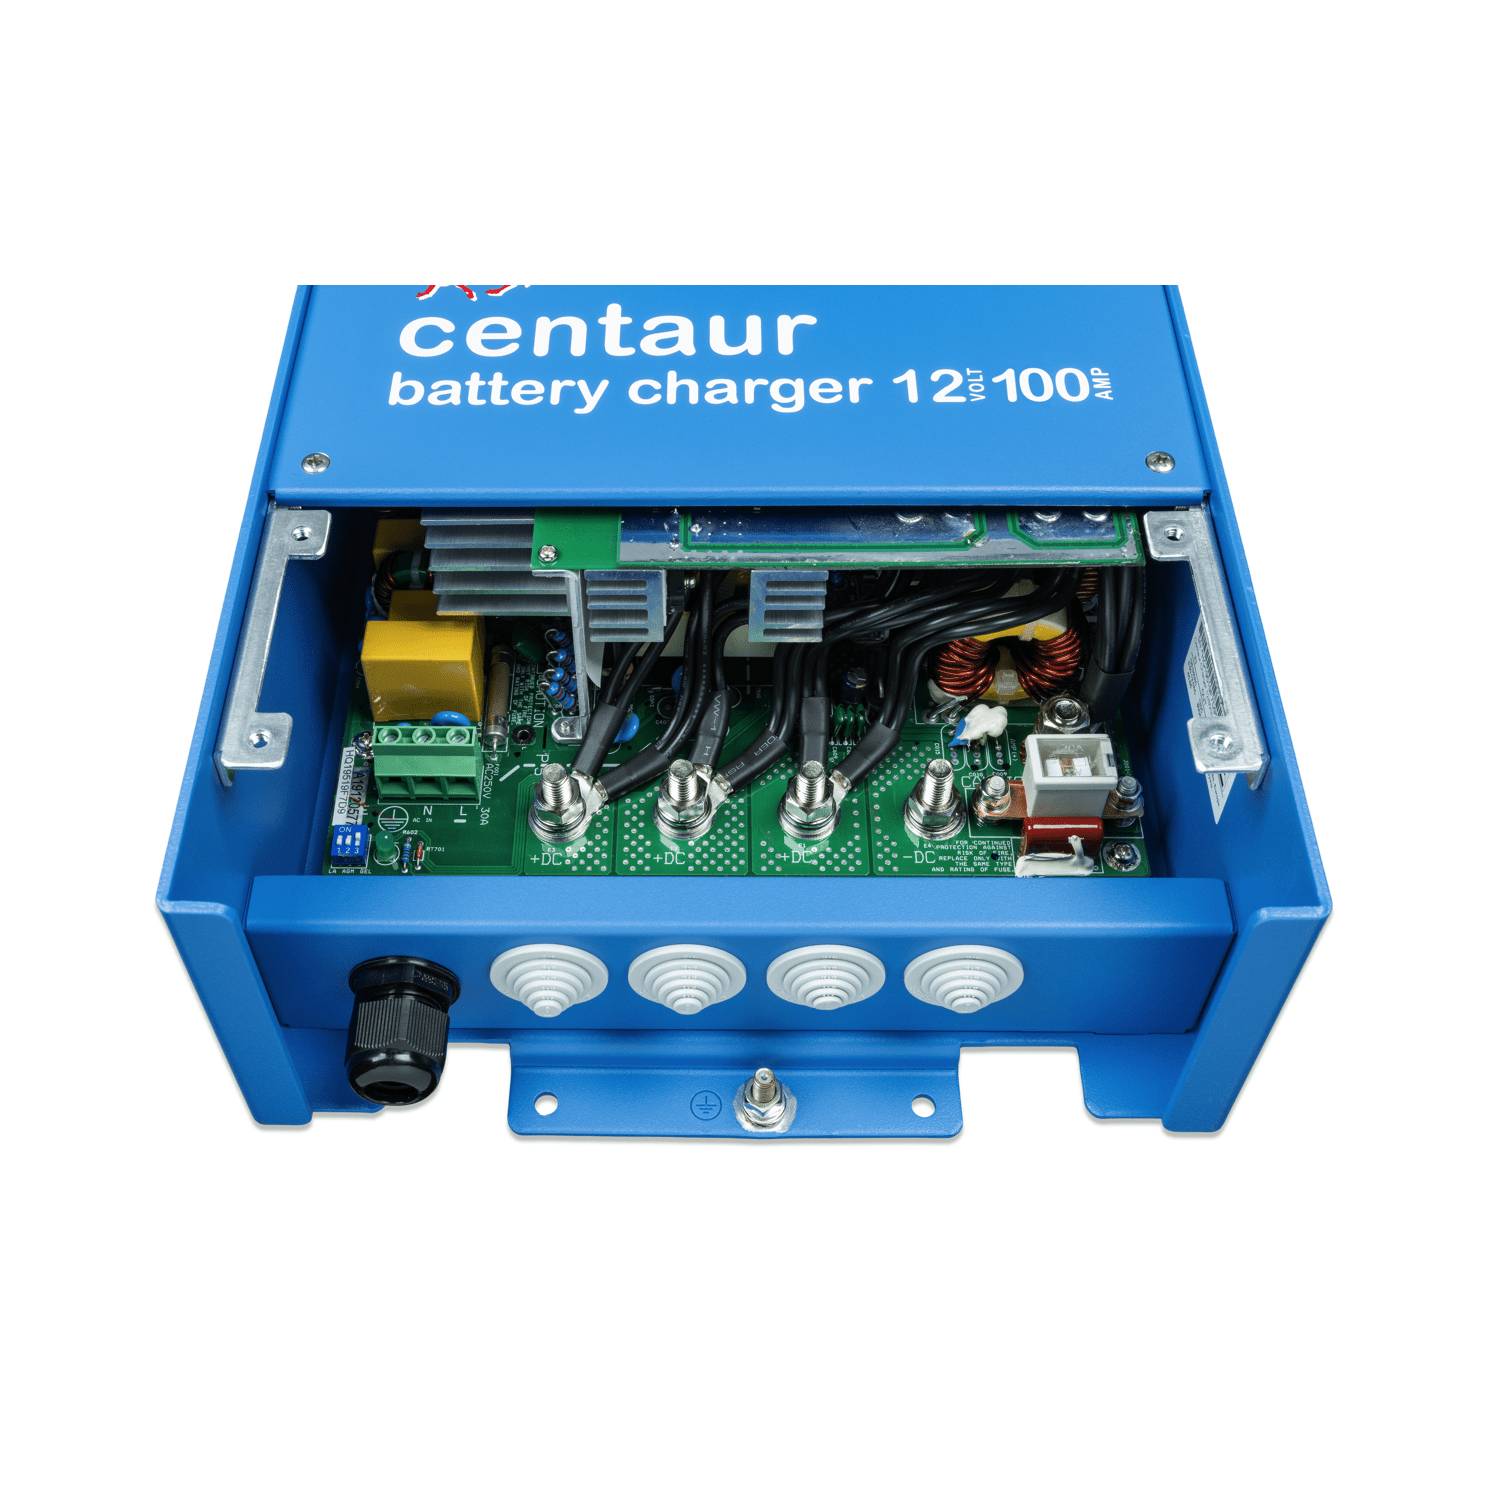 12V 100A Charger with 3 outputs | Centaur Battery Charger ports